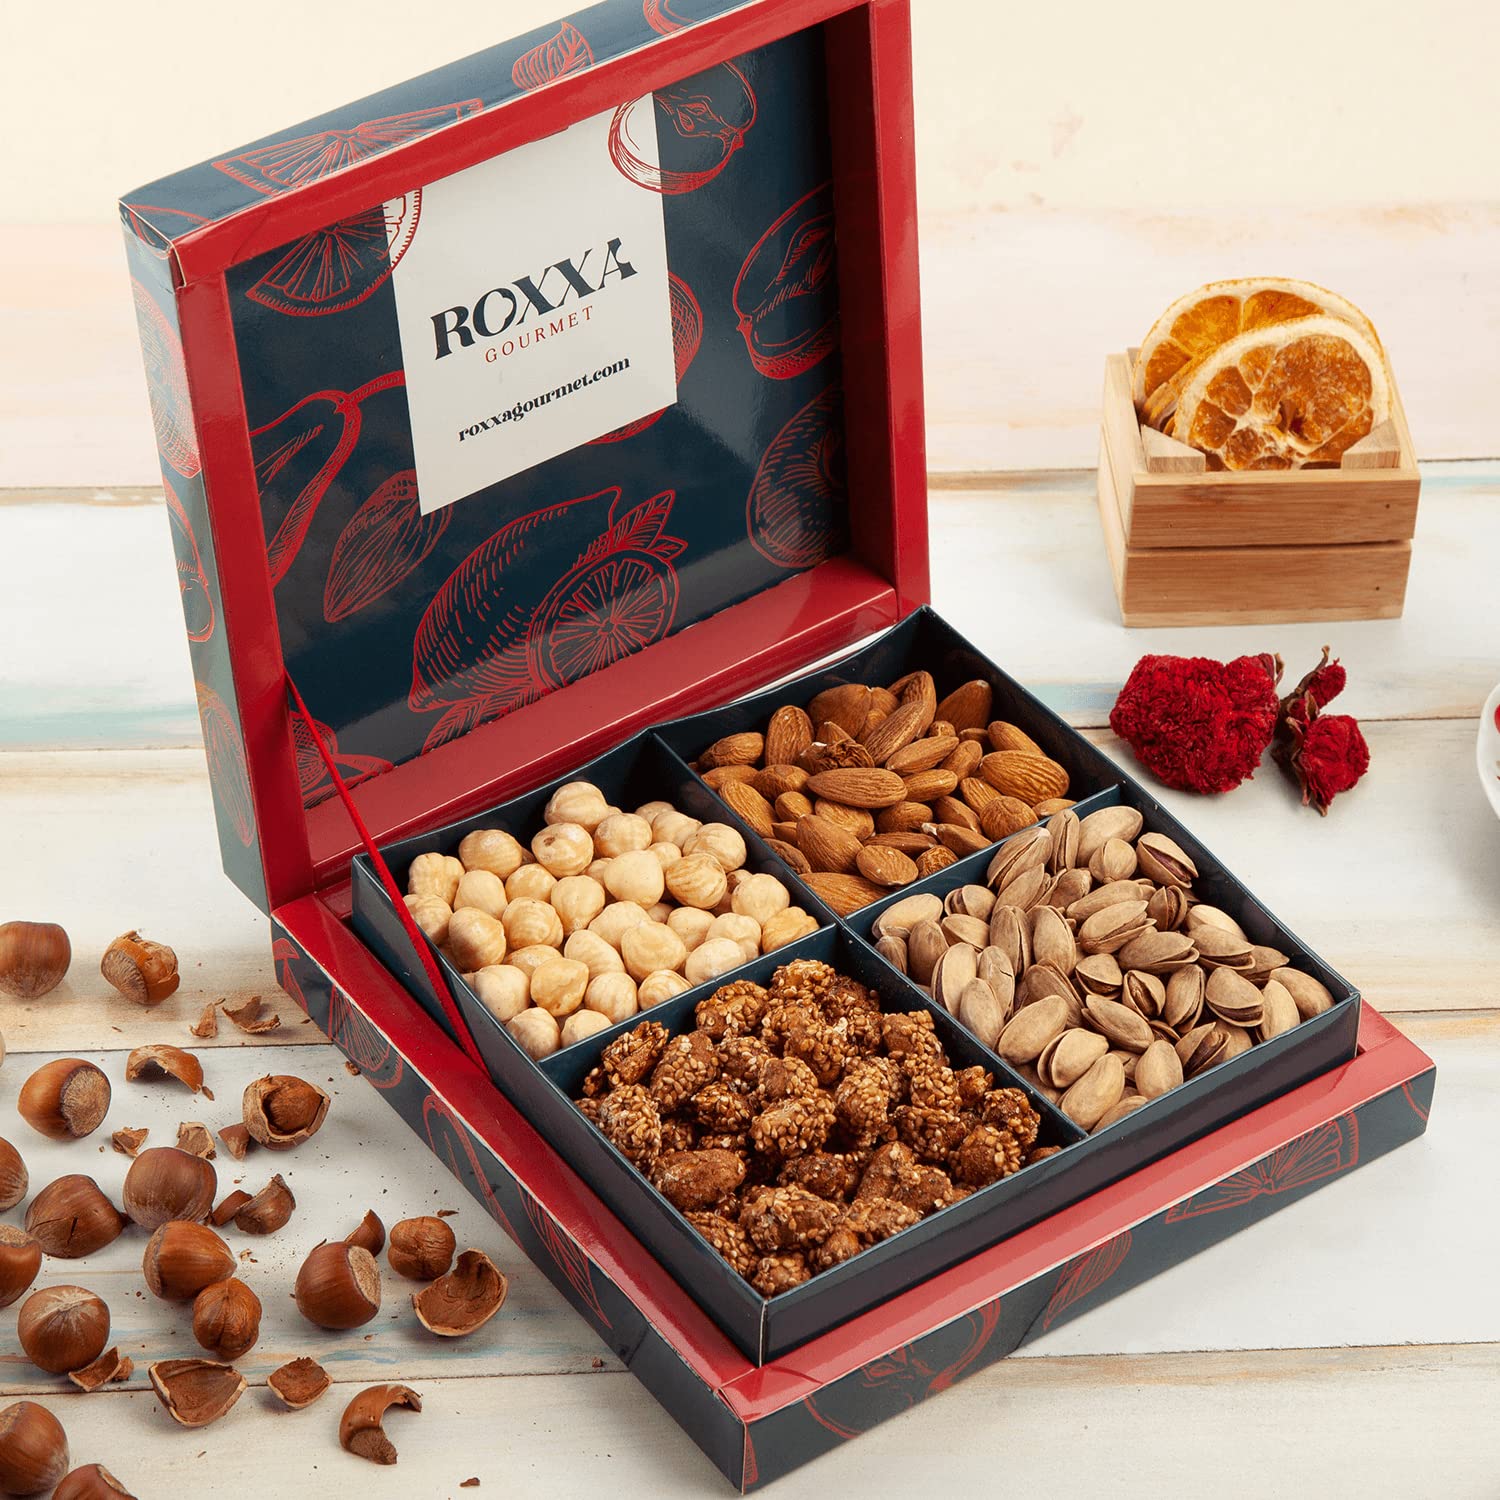 4 Variety  Nuts & Dried Fruit Cardboard Box, Holiday Snack & Dessert Platter Gift Basket with Almonds, Pistachio, Honey Roasted Peanuts & Hazelnuts- Gifts for Valentine's Day, Fathers Day, Mothers Day, Birthday, Family, Parents